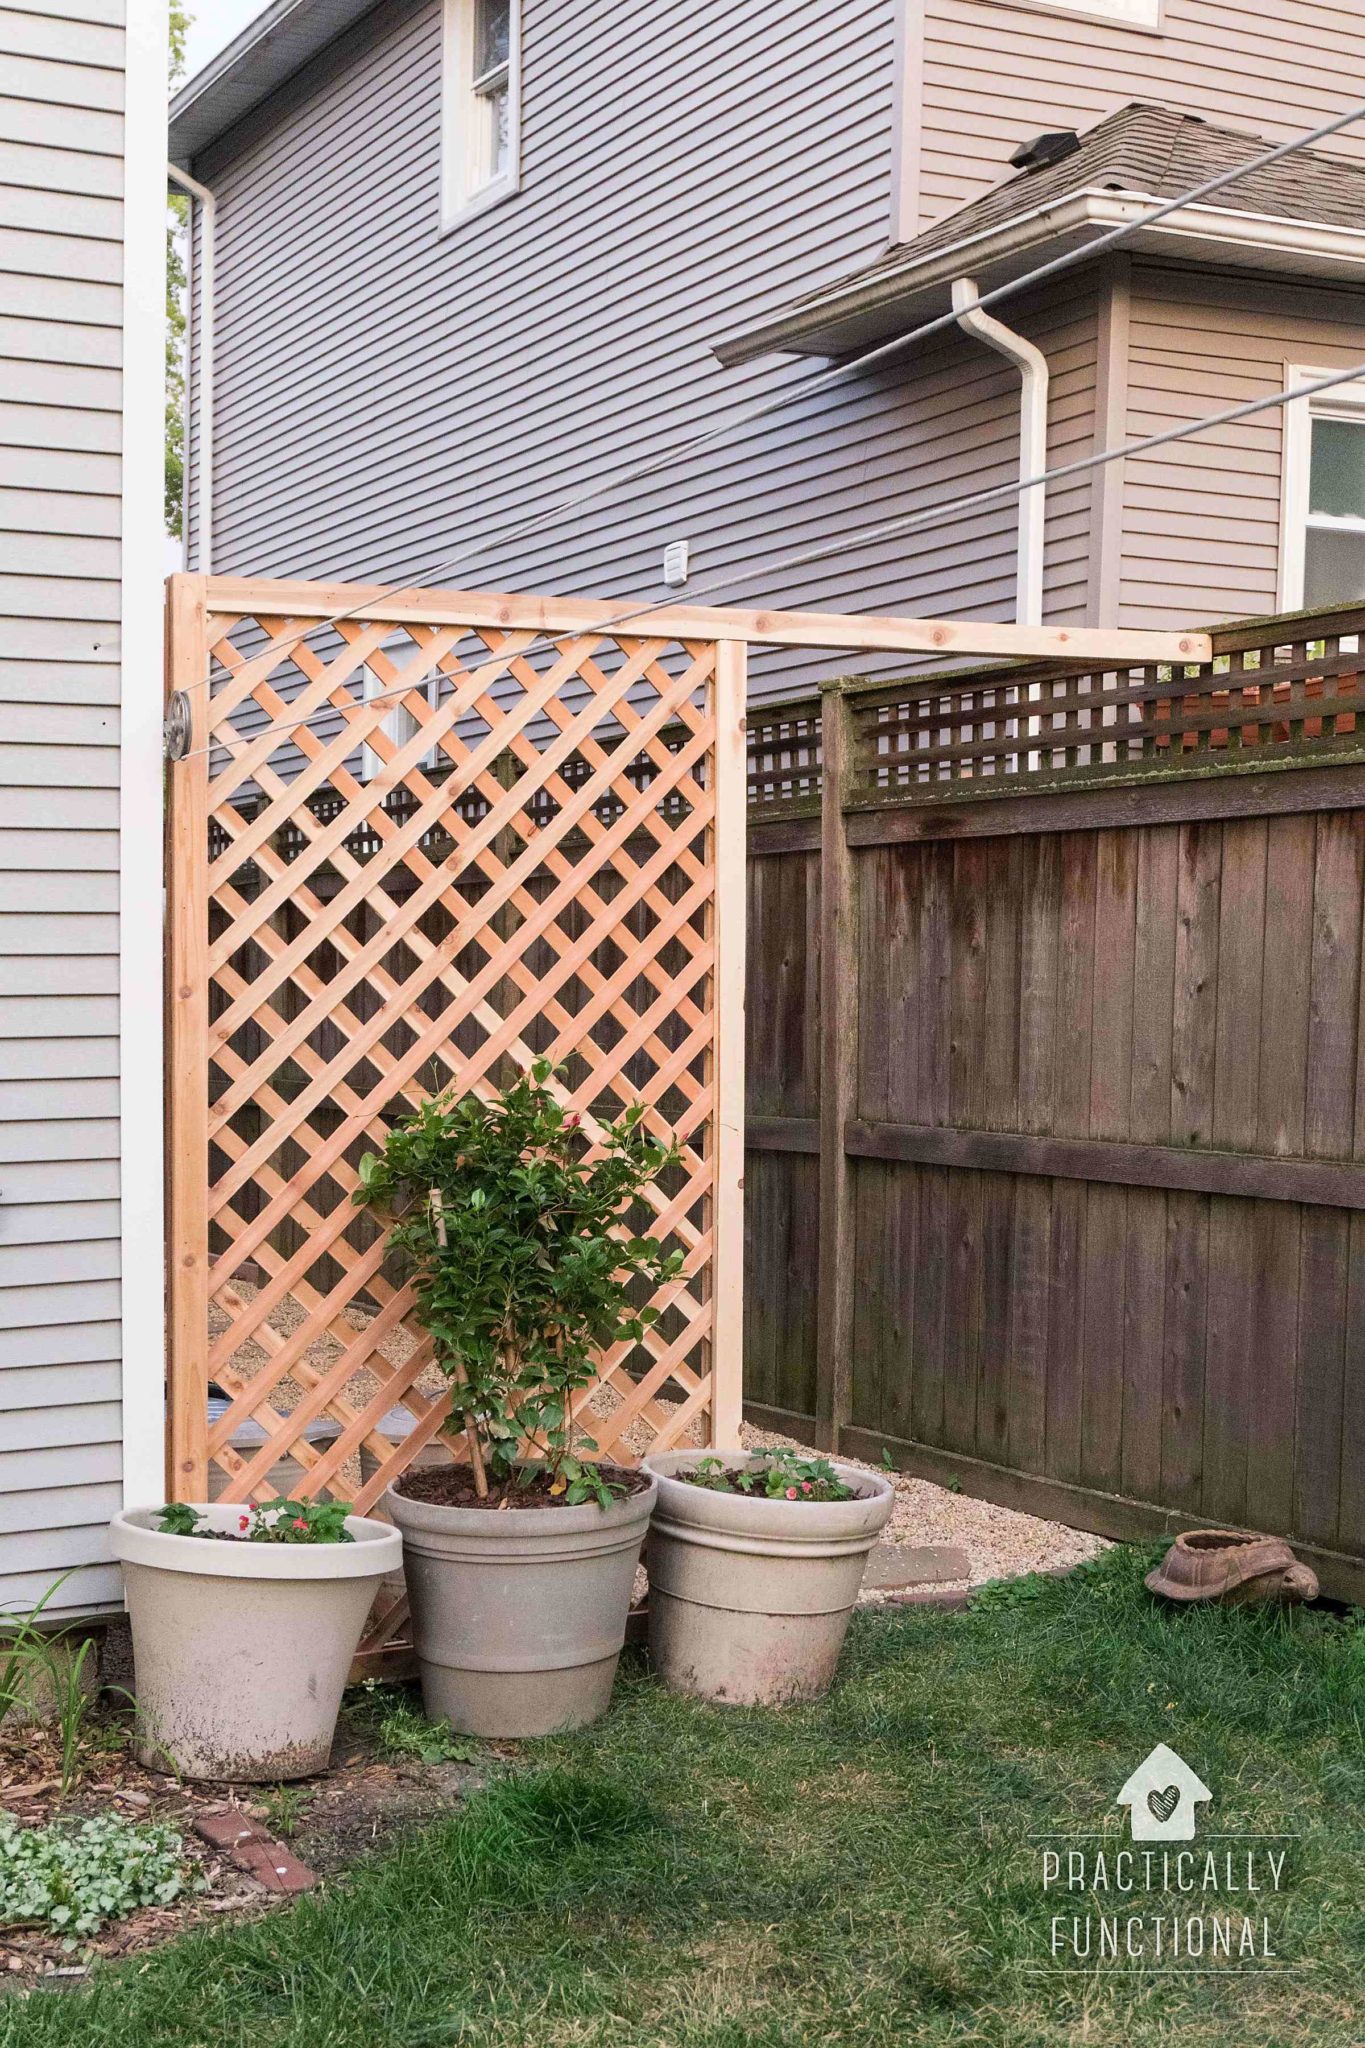 Build A Simple DIY Trellis Screen To Hide Ugly Areas In Your Backyard! – Practically Functional